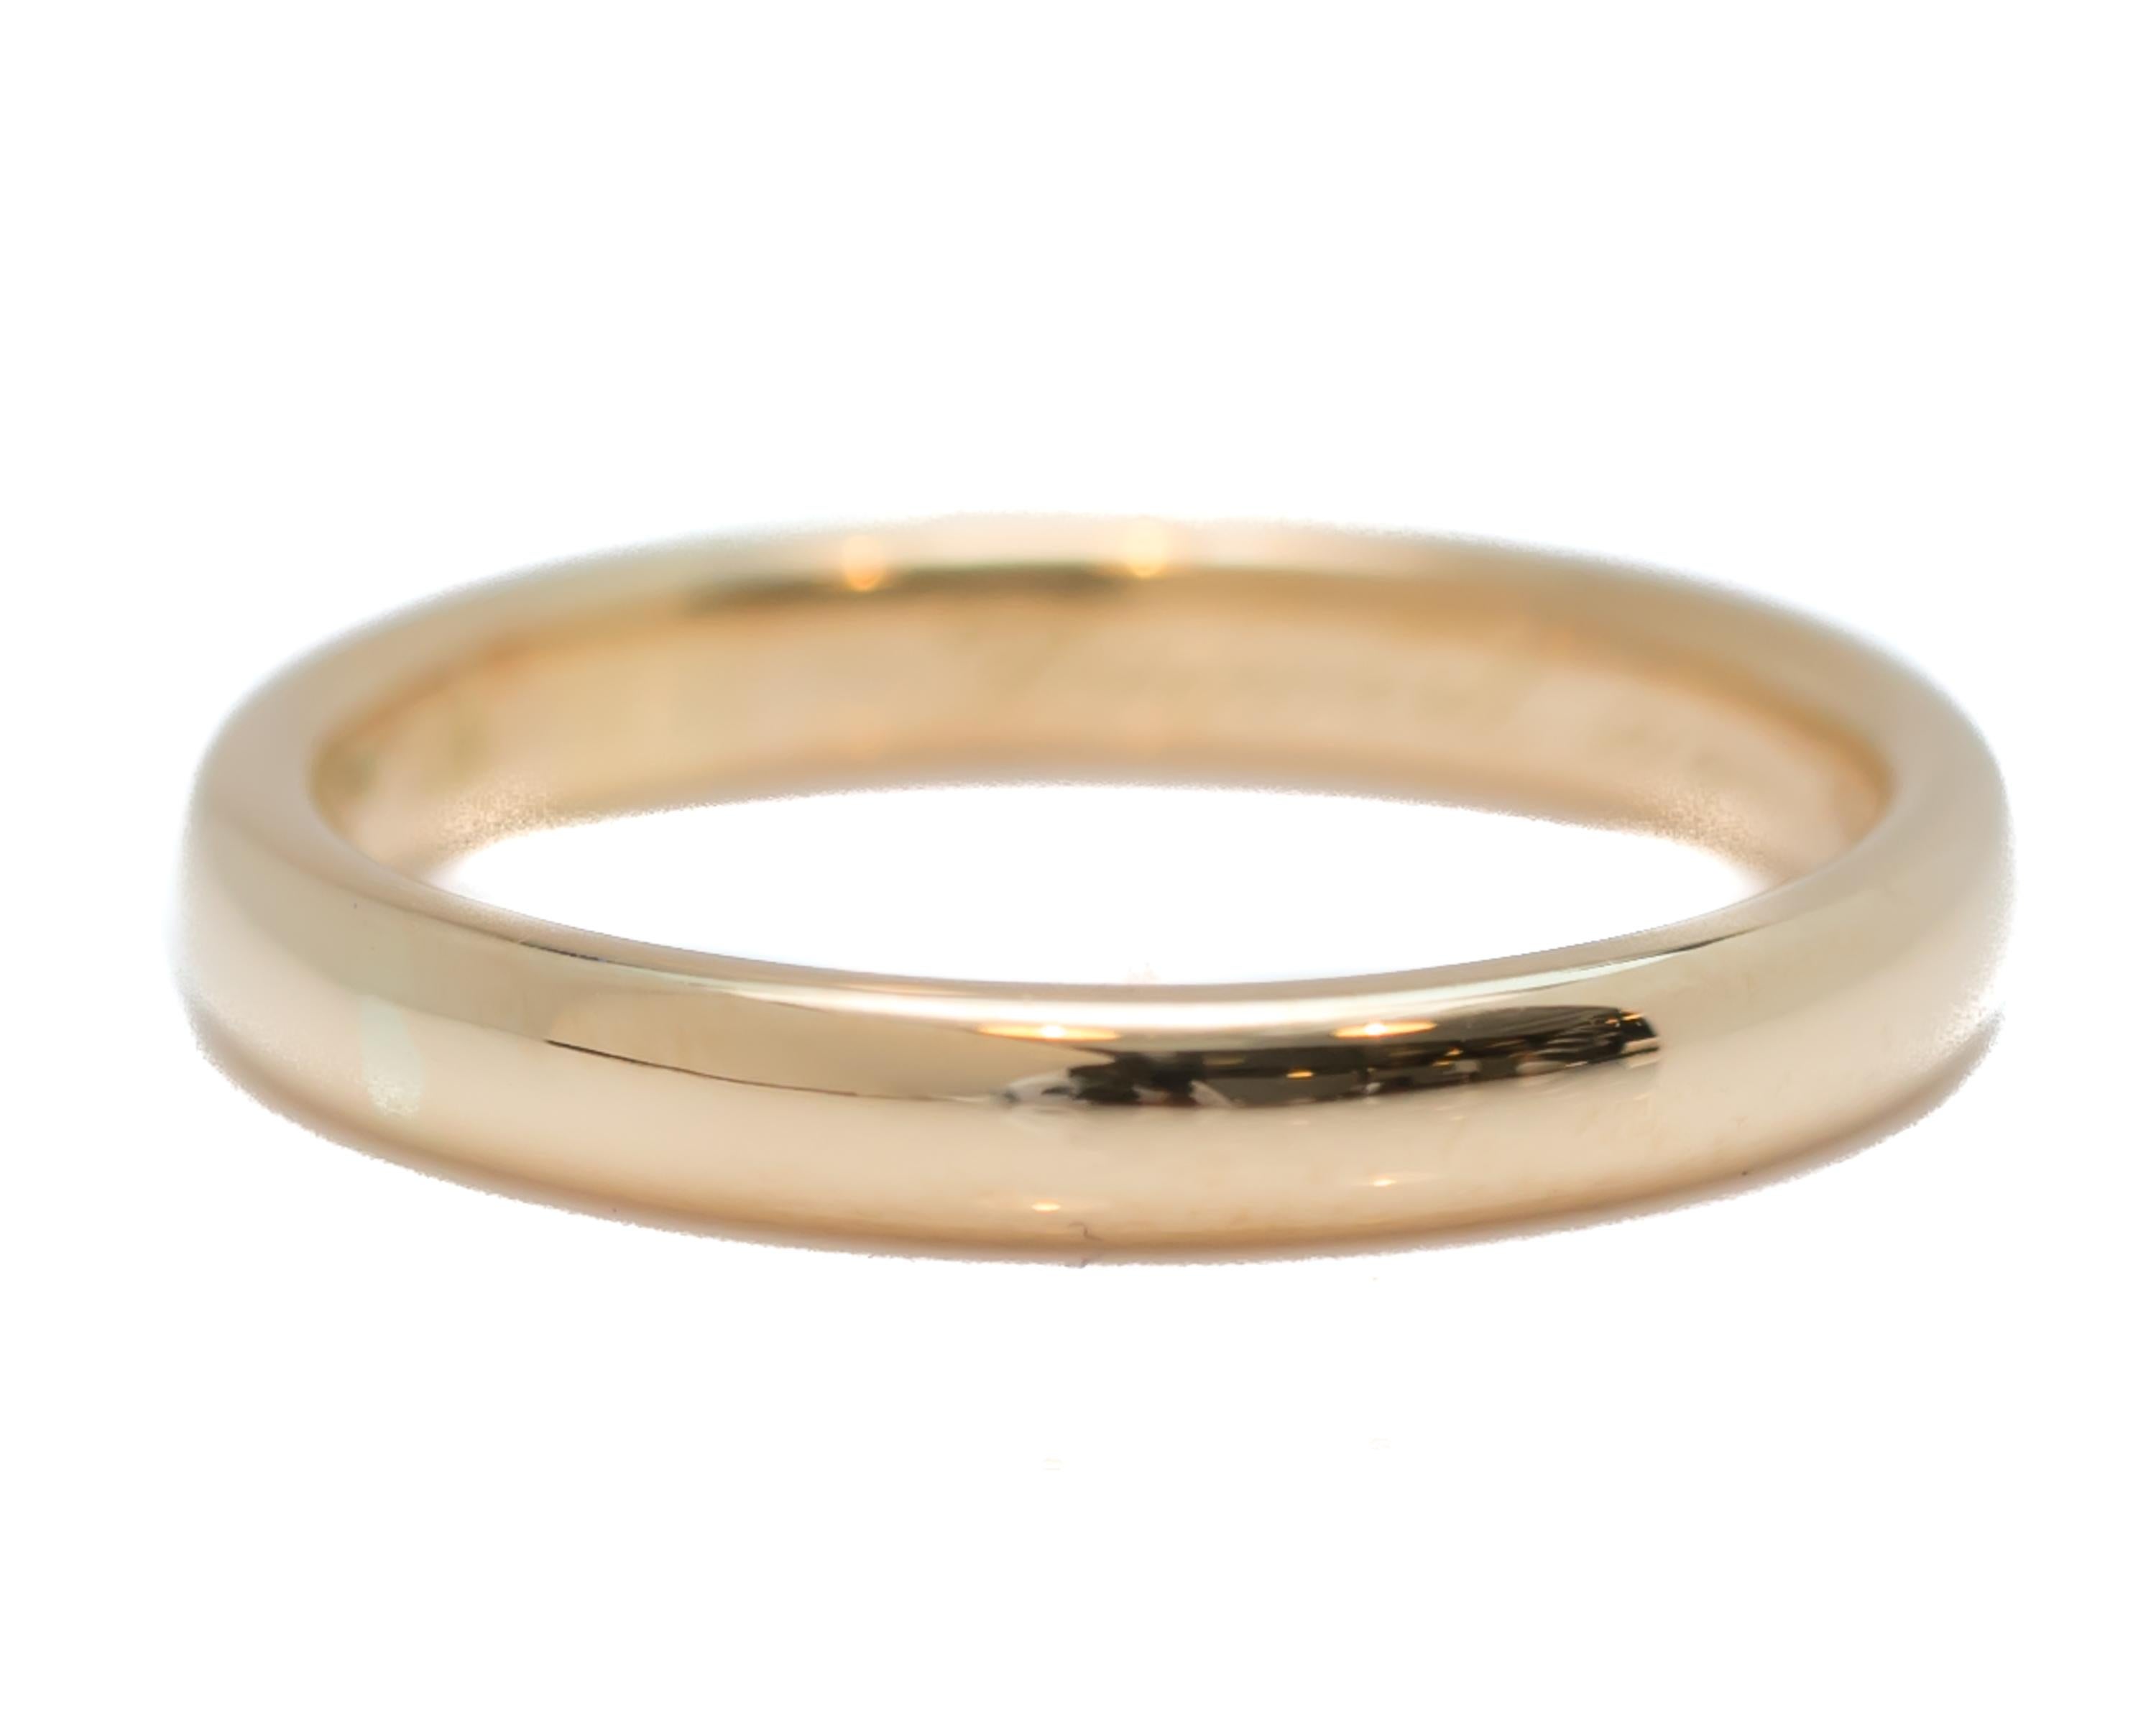 1914 Edwardian Era Antique Tiffany & Co. Gold Wedding Band crafted in 18 Karat Yellow Gold

Item Details: 
Ring Size: 6, can be resized
Metal Type: 18 Karat Yellow Gold
Weight: 3.6 grams
Hallmark: TIFFANY & CO. 18
Inner shank Script Engraving (in